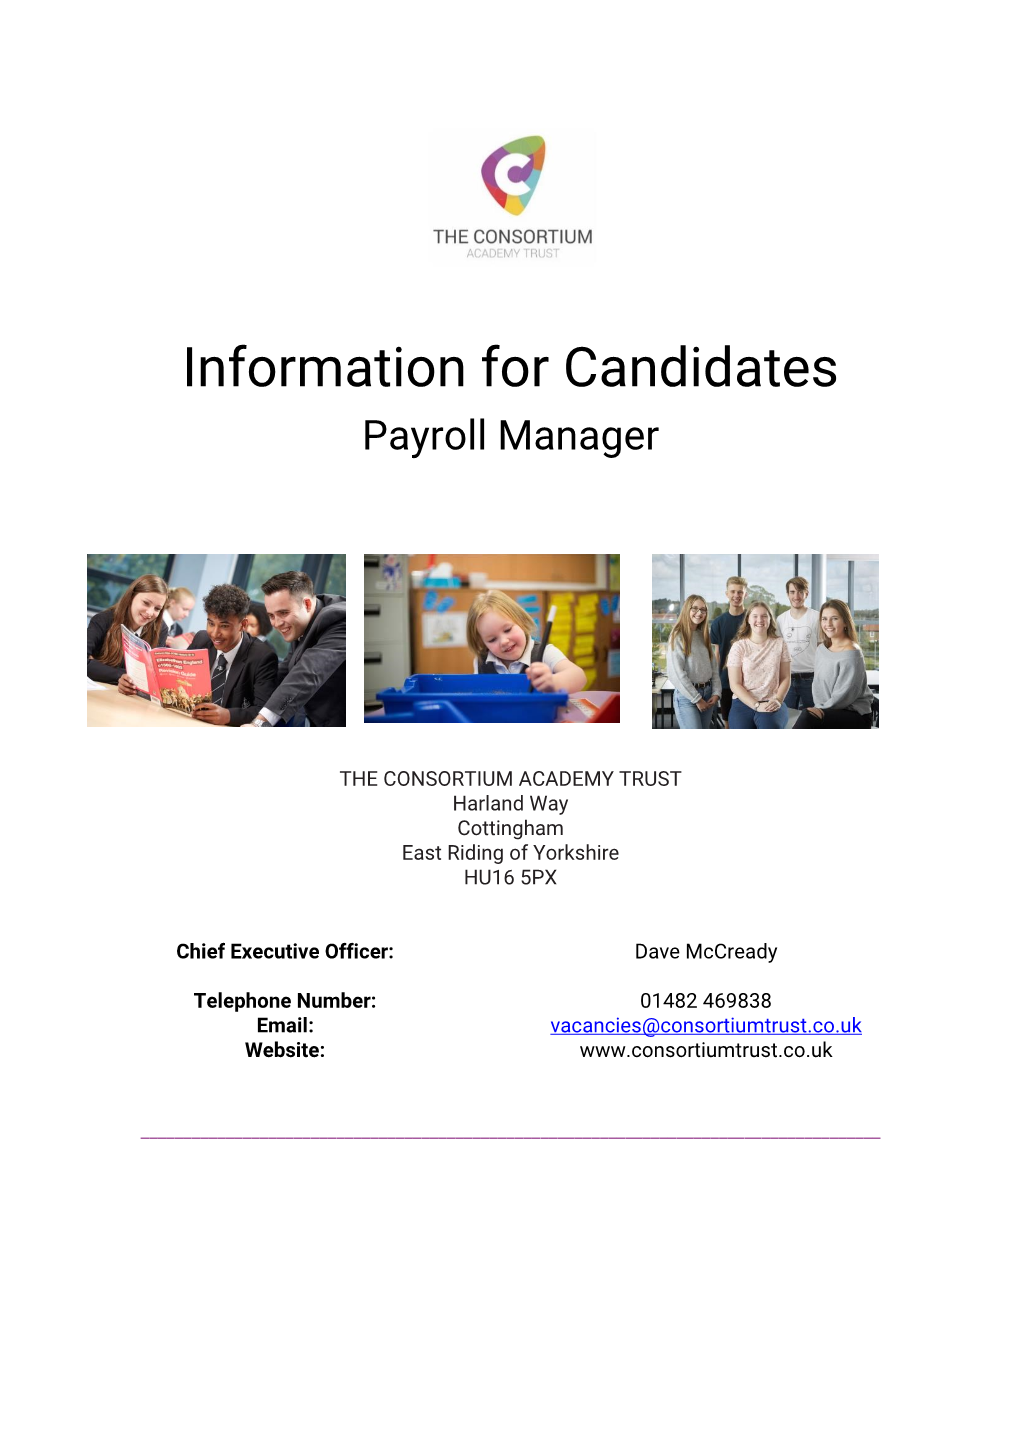 Information for Candidates Payroll Manager